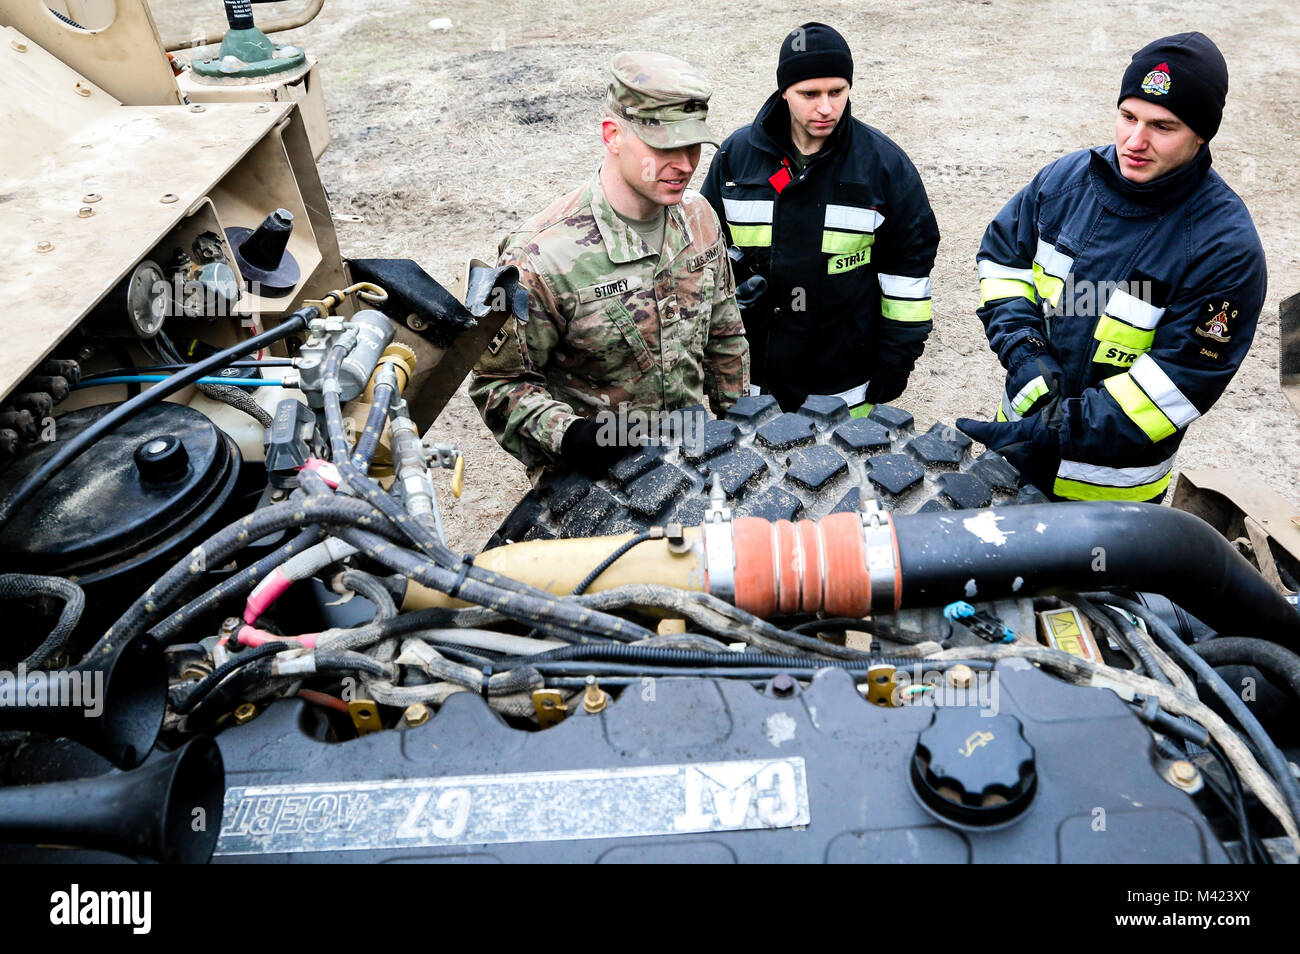 U.S. Army Staff Sgt. Clayton Storey (right), a Daytona, Ohio native, and field maintenance team chief with the 82nd Brigade Engineer Battalion, 2nd Armored Brigade Combat Team, 1st Infantry Division, shows a member of the Polish 5430rd Military Fire Brigade and an emergency first responder the engine of a Mine-Resistant Ambush Protected Vehicle in Zagan, Poland on Feb. 9, 2018.  Storey and his unit are part of a multinational training exercise designed to increase interoperability during Atlantic Resolve.  (U.S. Army photo by Spc. Hubert D. Delany III / 22nd Mobile Public Affairs Detachment) Stock Photo